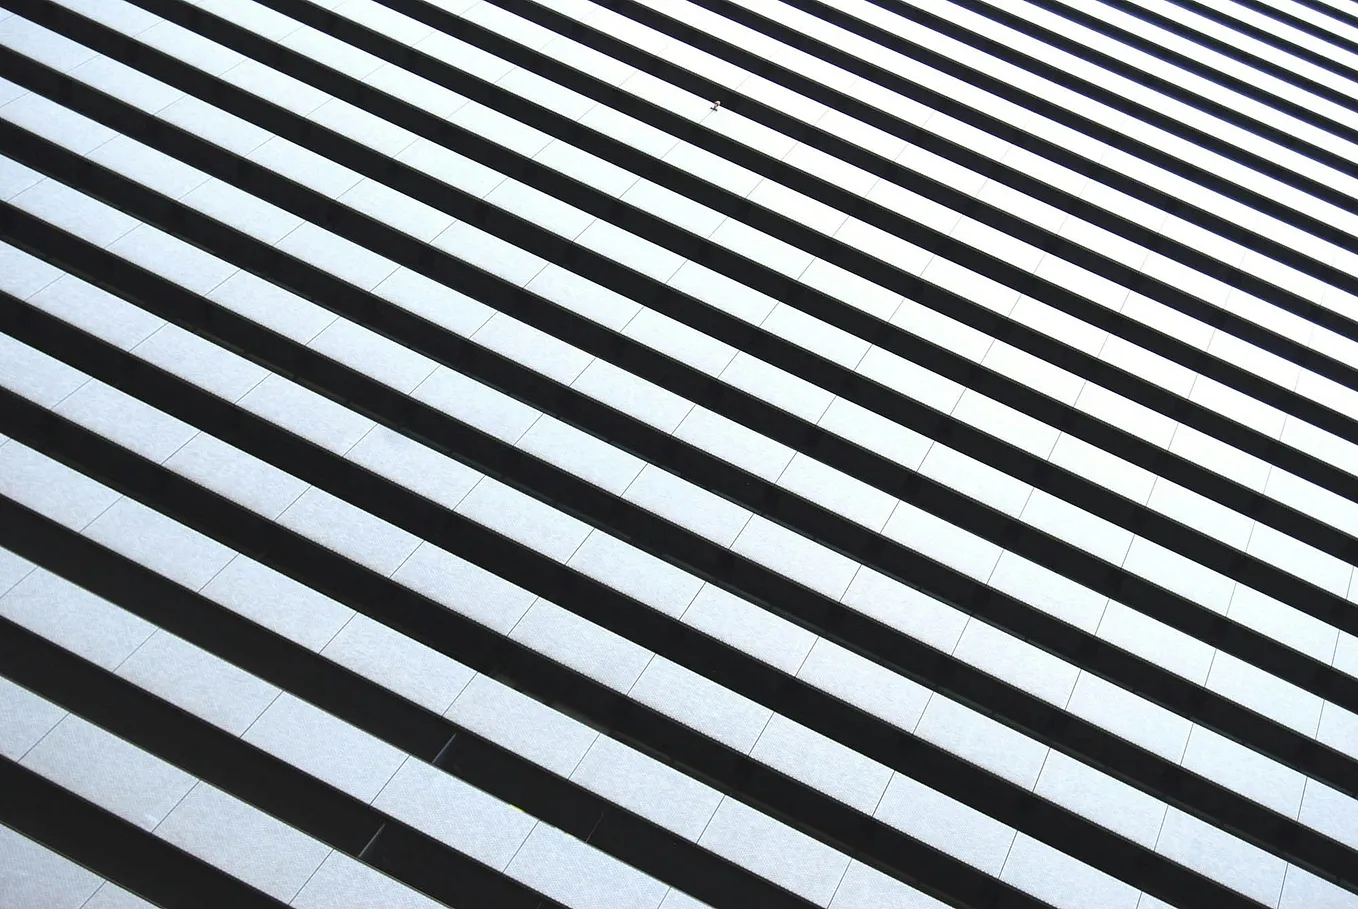 A diagonal photo of tiling in the pattern of black and white zebra stripes.